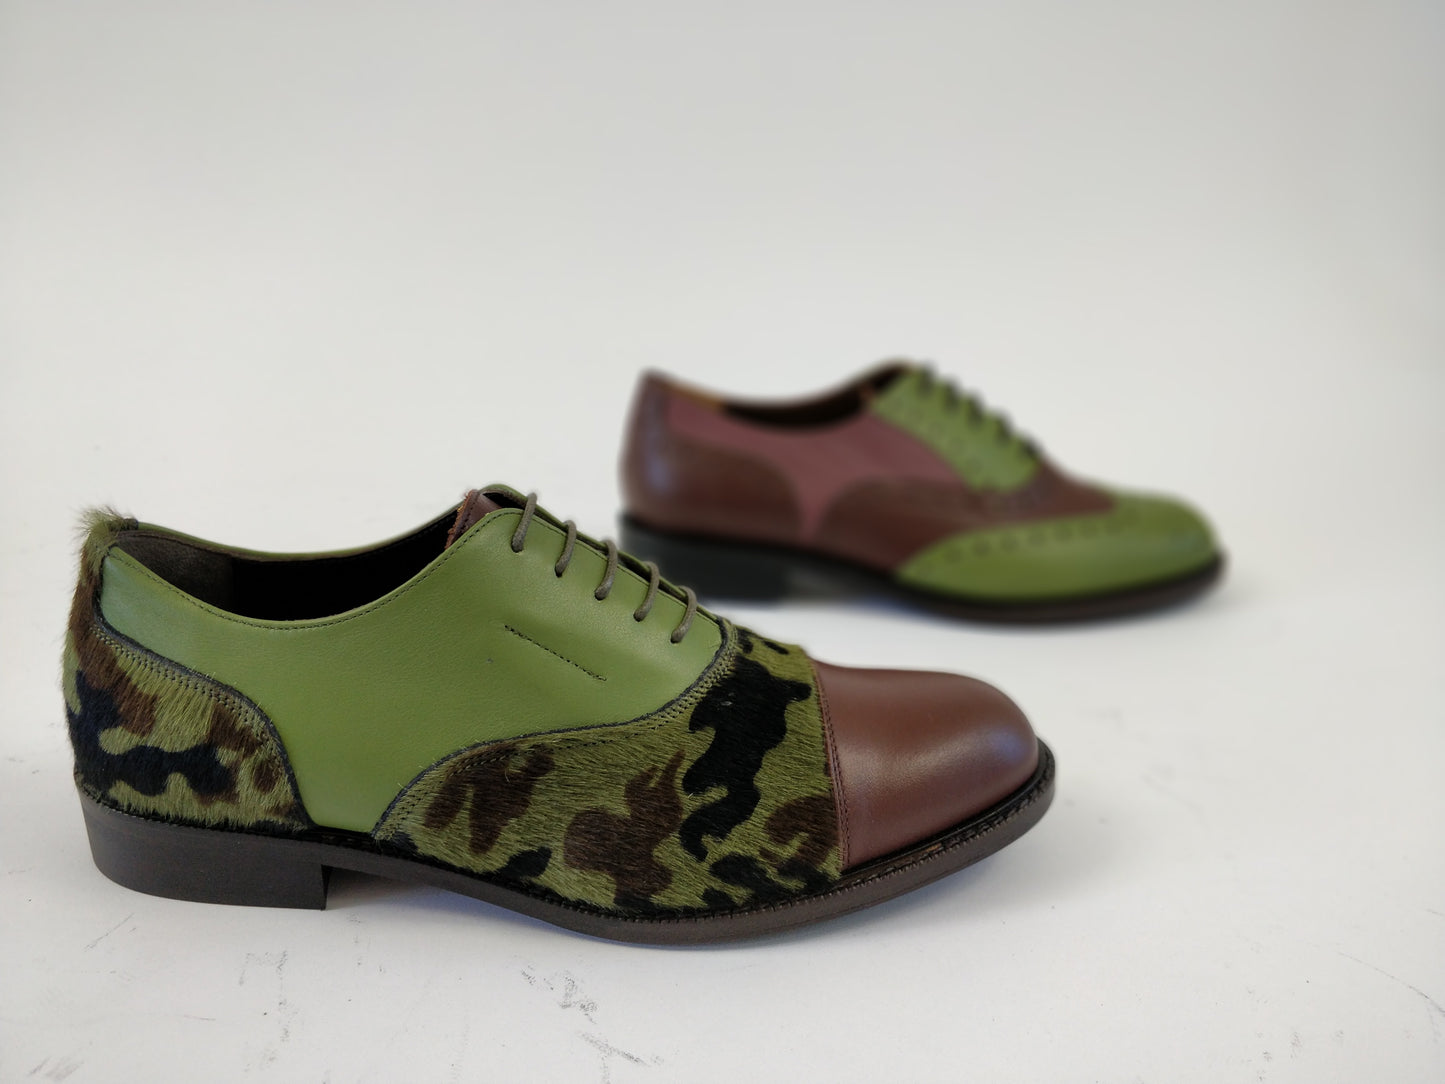 OXFORD LEATHER SHOES women/Italian Handmade shoes/Flat shoes Genuine Leather/pony leather/Made In Italy/Green shoes,Brown shoes,Camoflage